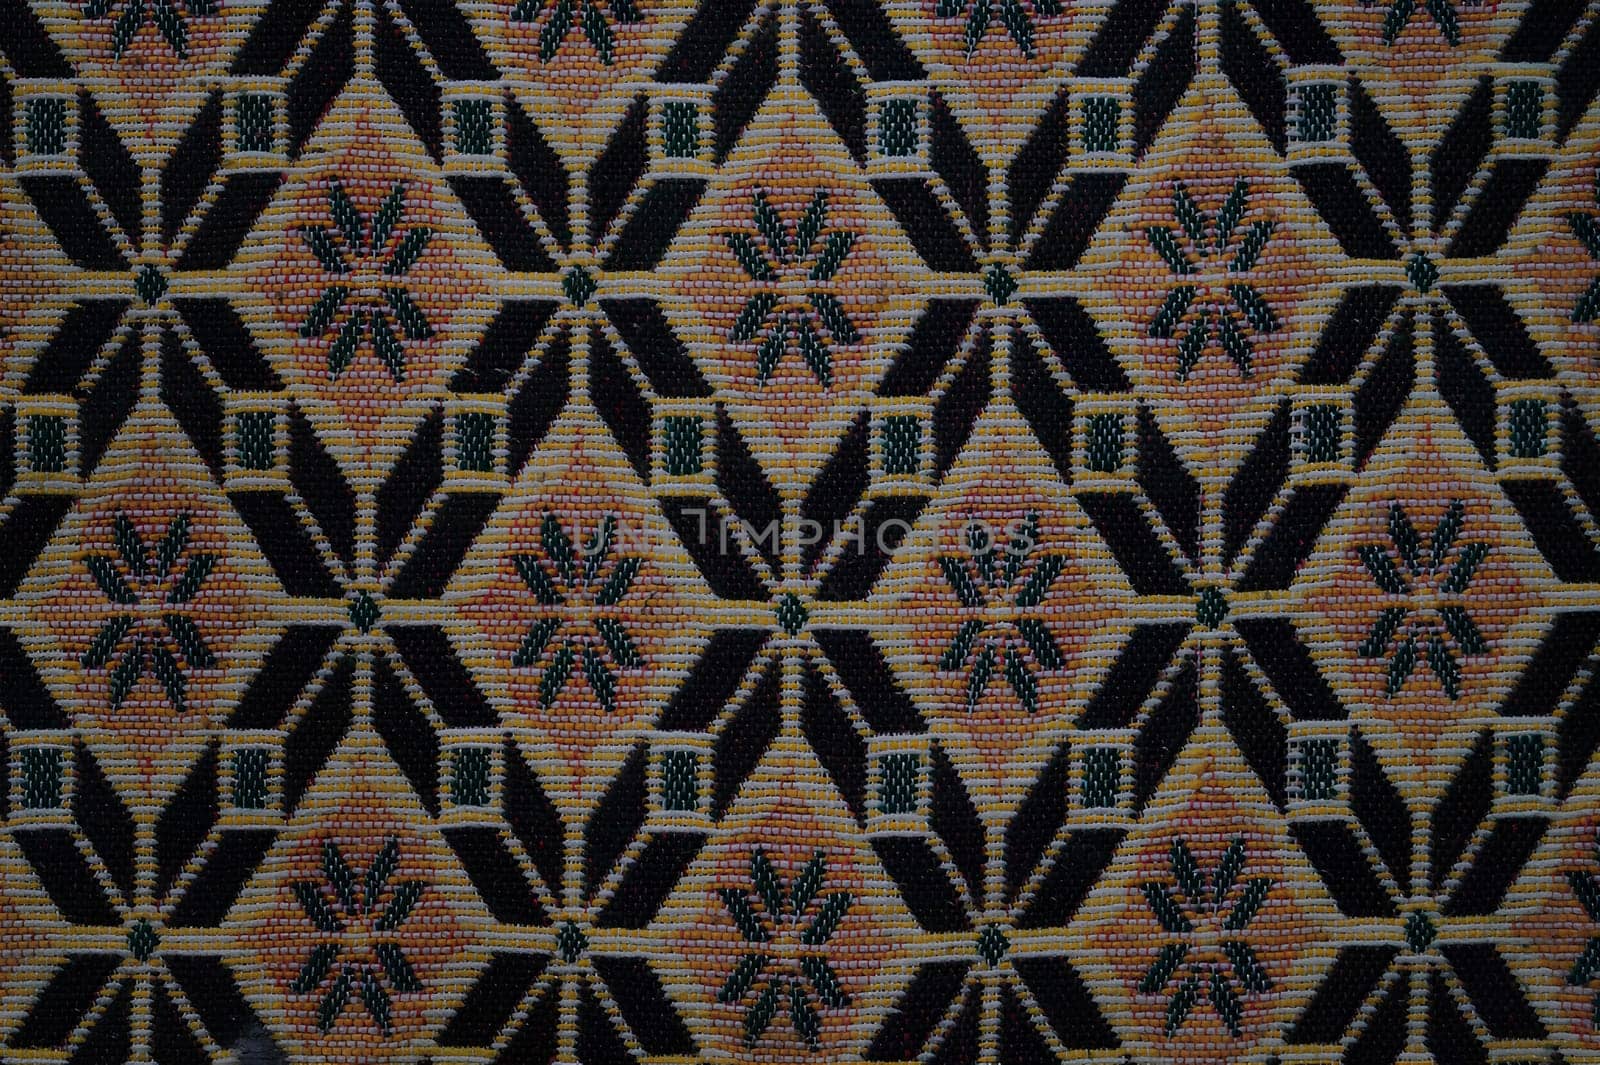 A patterned carpet with a black and brown color scheme. High quality photo